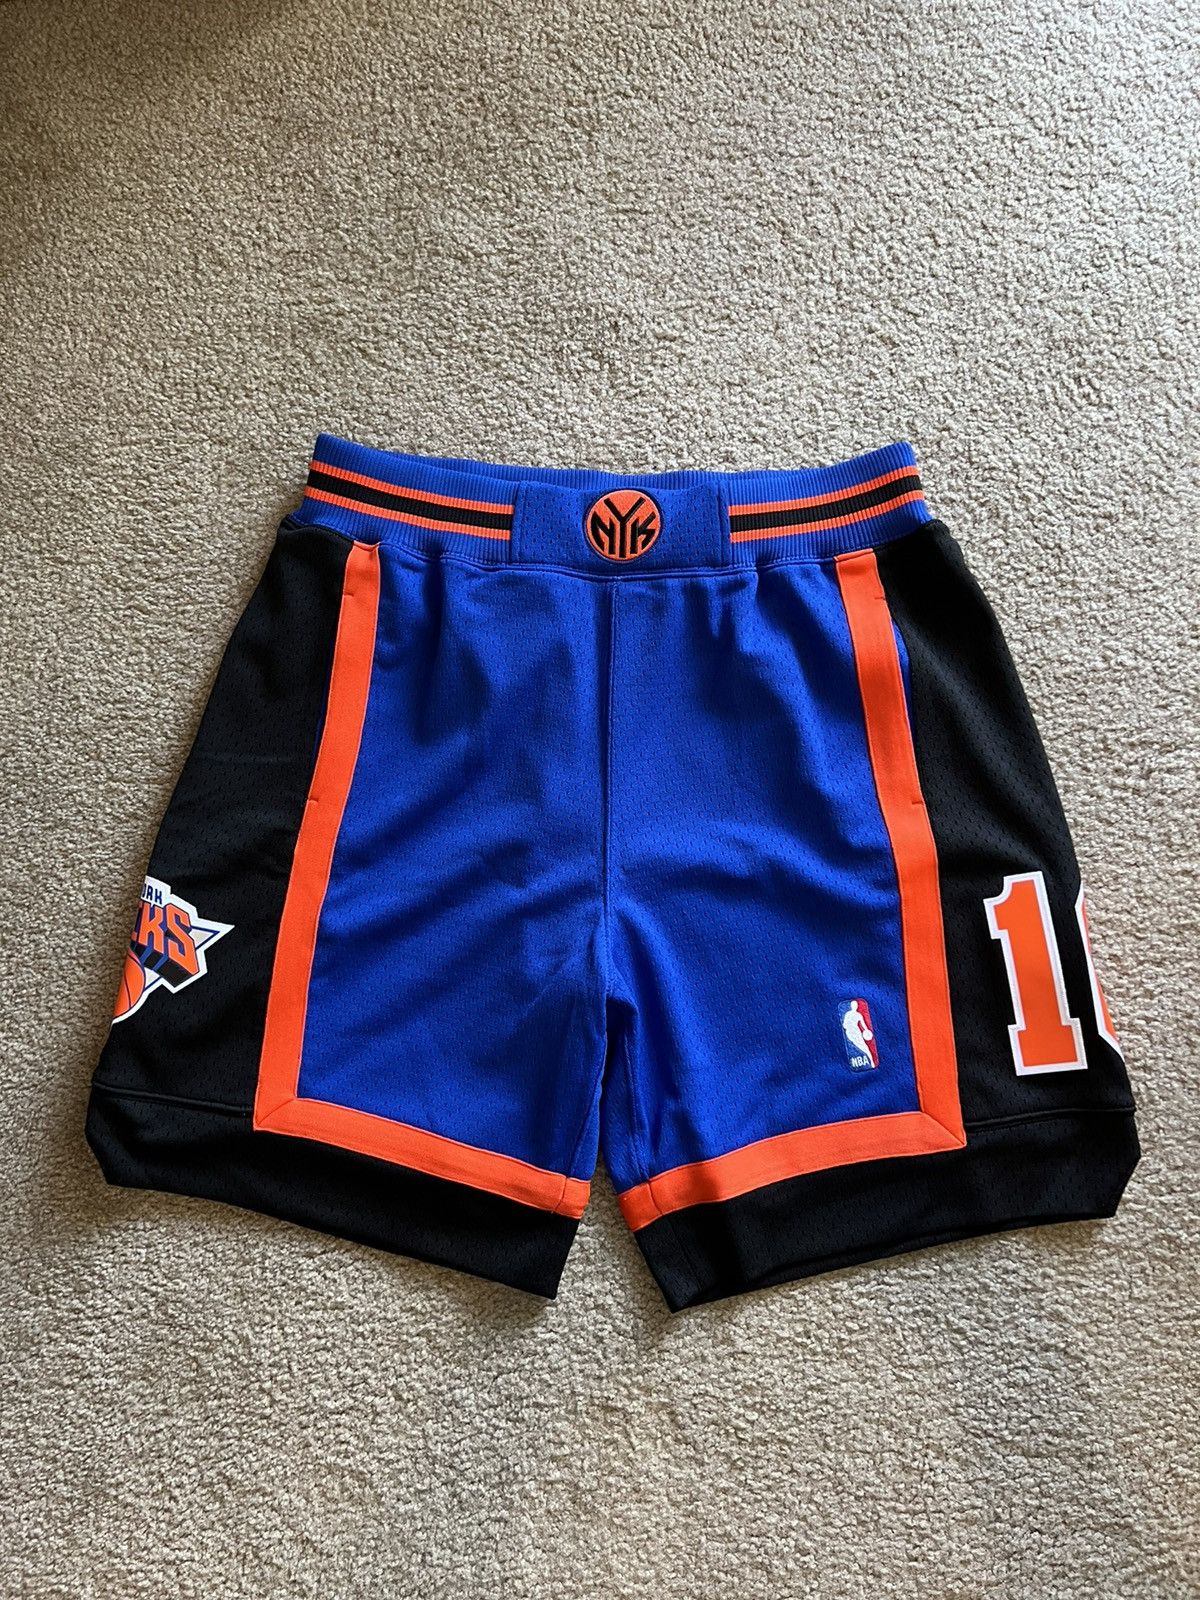 Kith Mitchell & Ness for New York Knicks 10 Year Short Multi